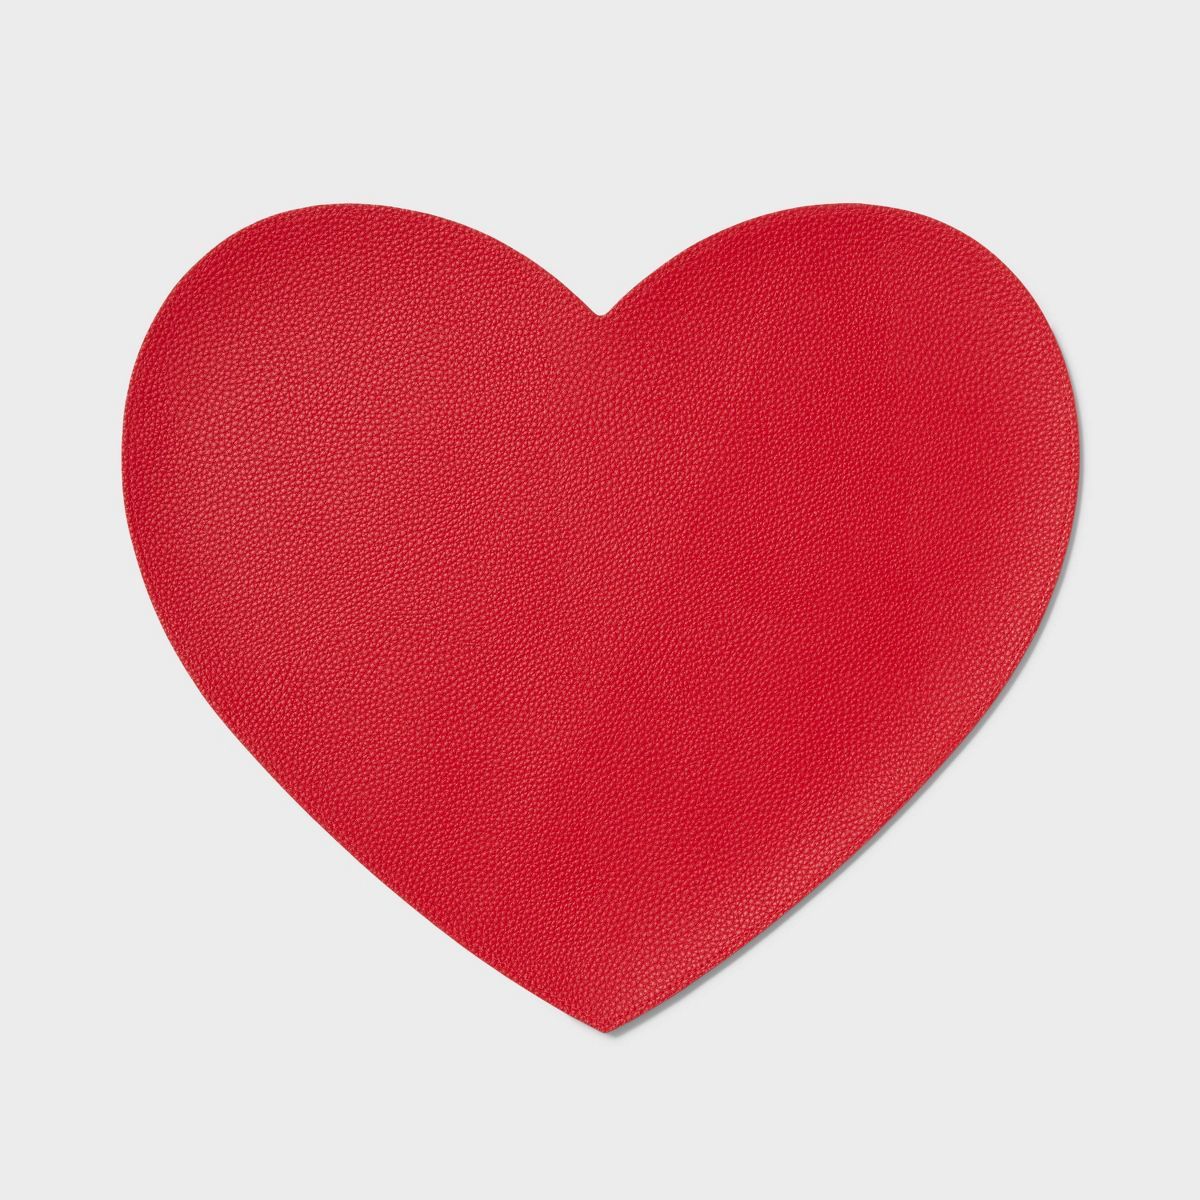 Valentine's Day Faux Leather Heart Placemat Charger Red - Threshold™ | Target